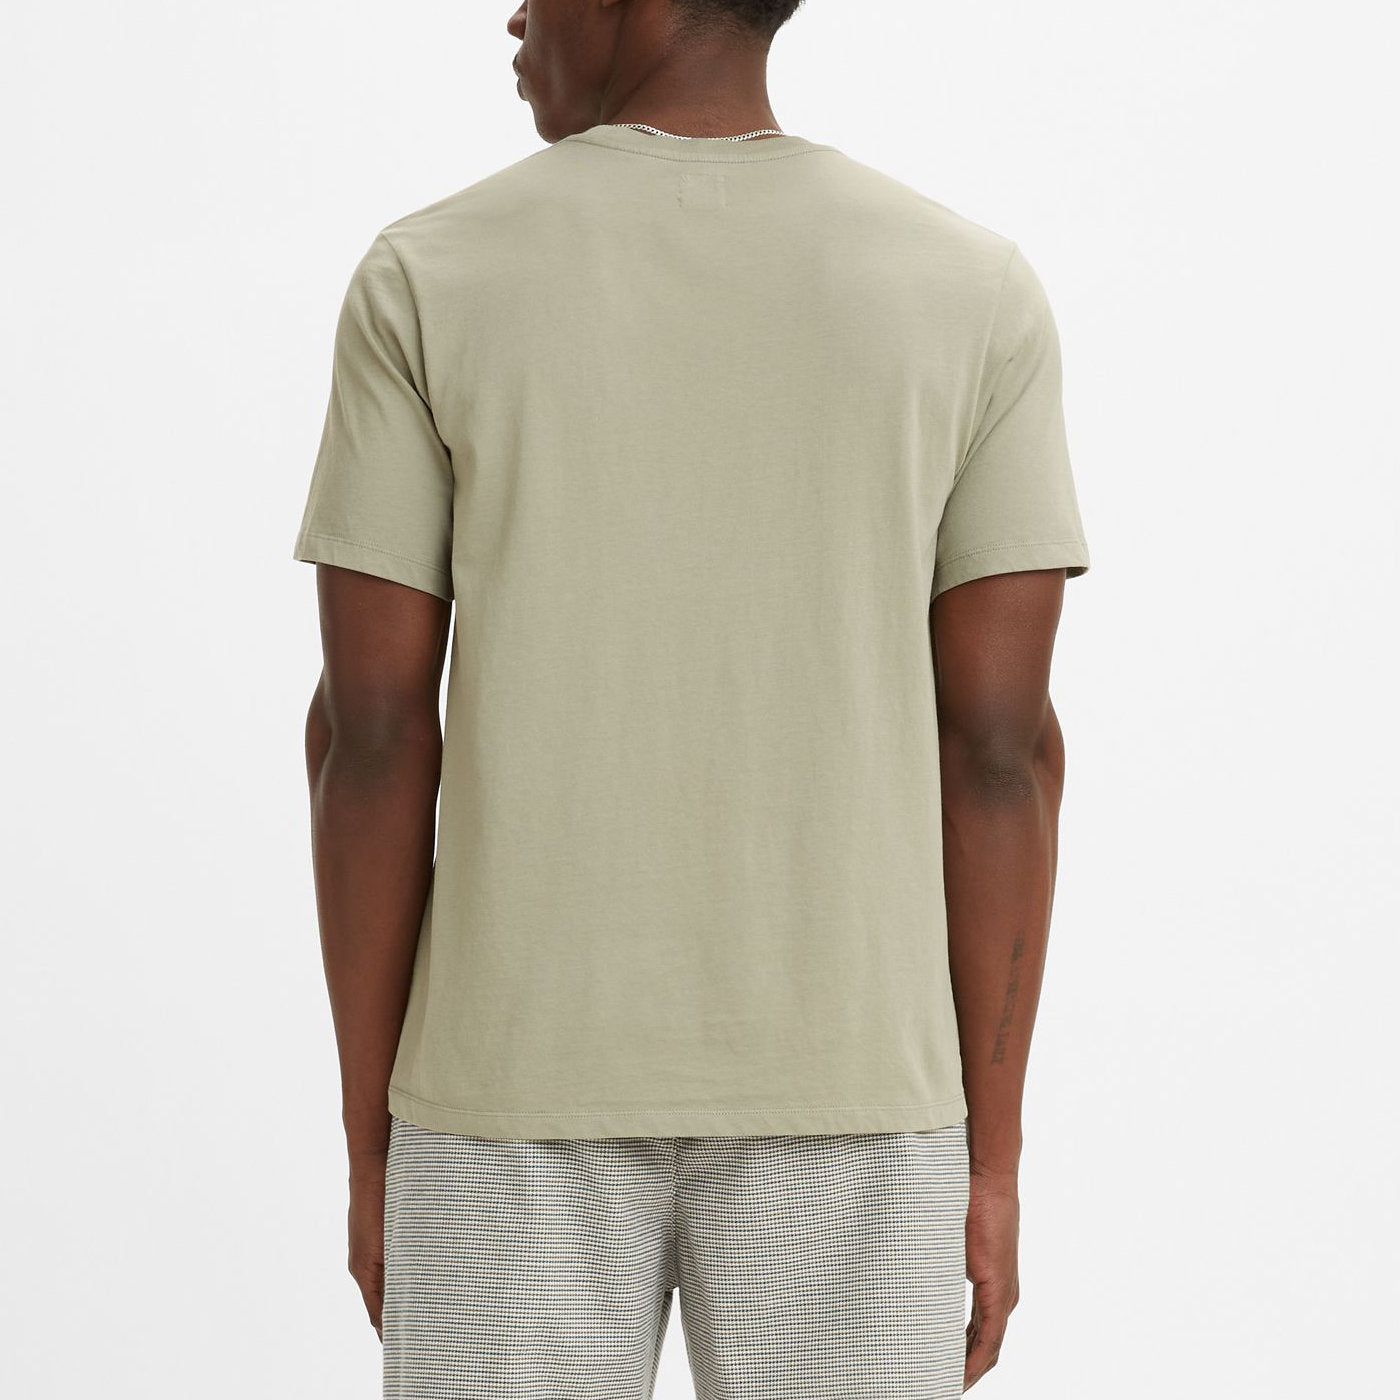 Levis The Essential T-Shirt Seagrass